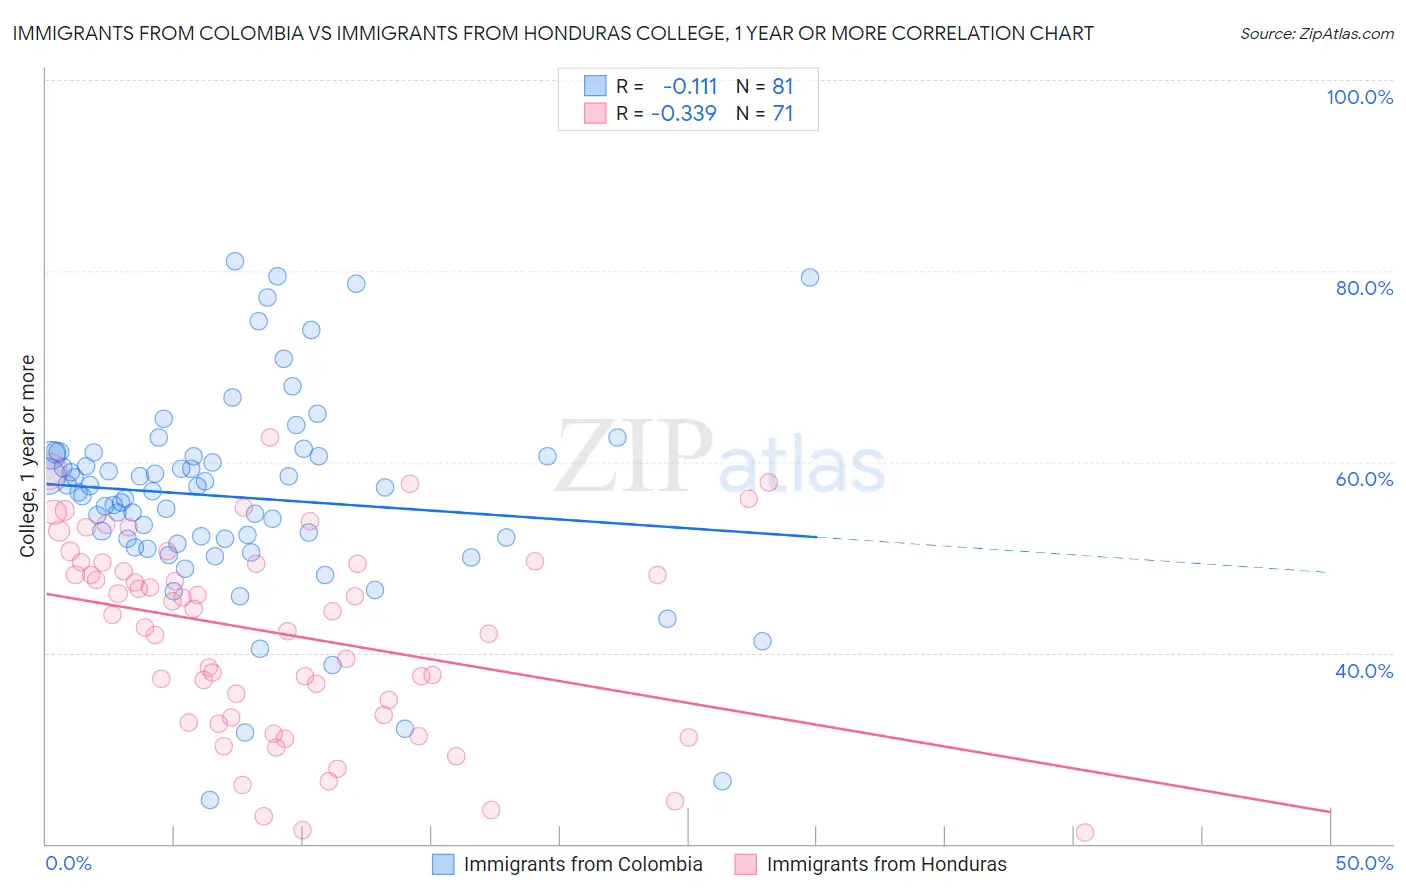 Immigrants from Colombia vs Immigrants from Honduras College, 1 year or more